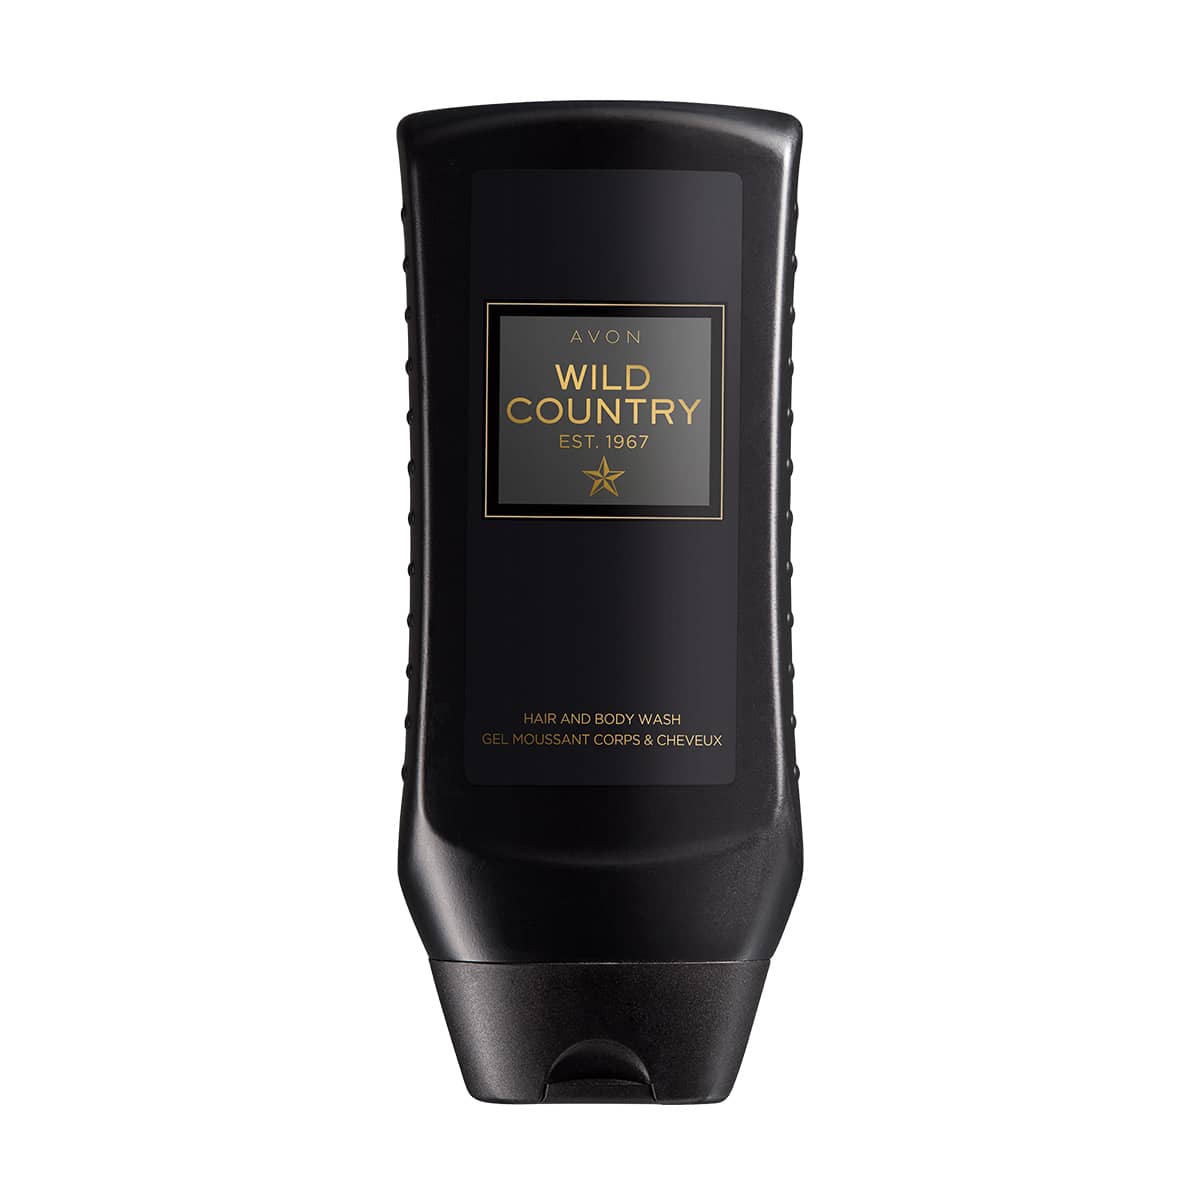 Wild Country Gel Douche Corps et Cheveux 250ml